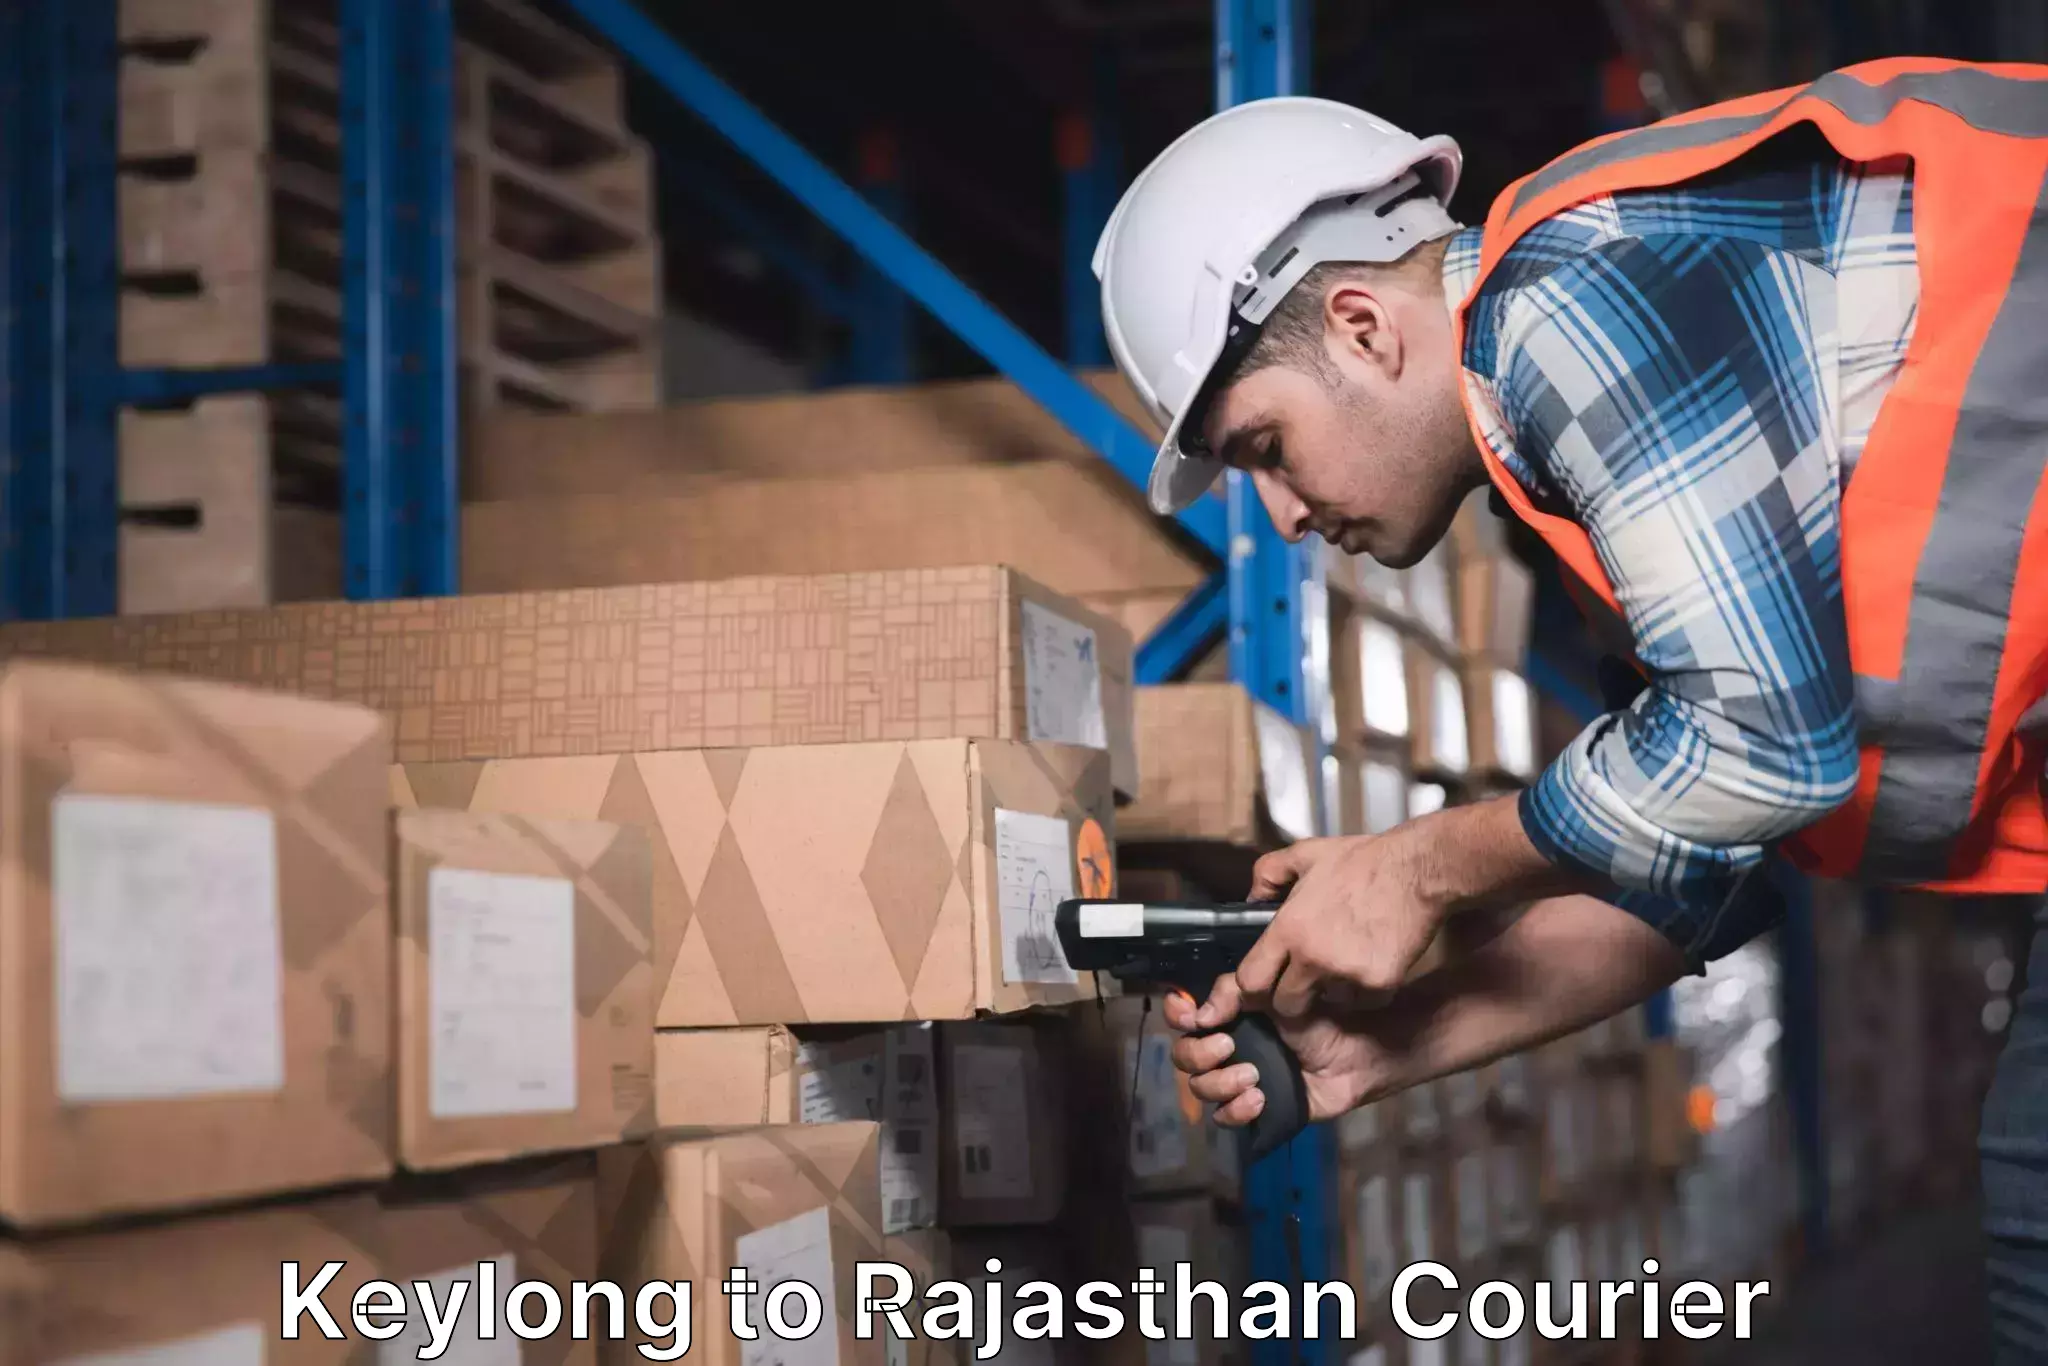 Courier insurance Keylong to Rajasthan